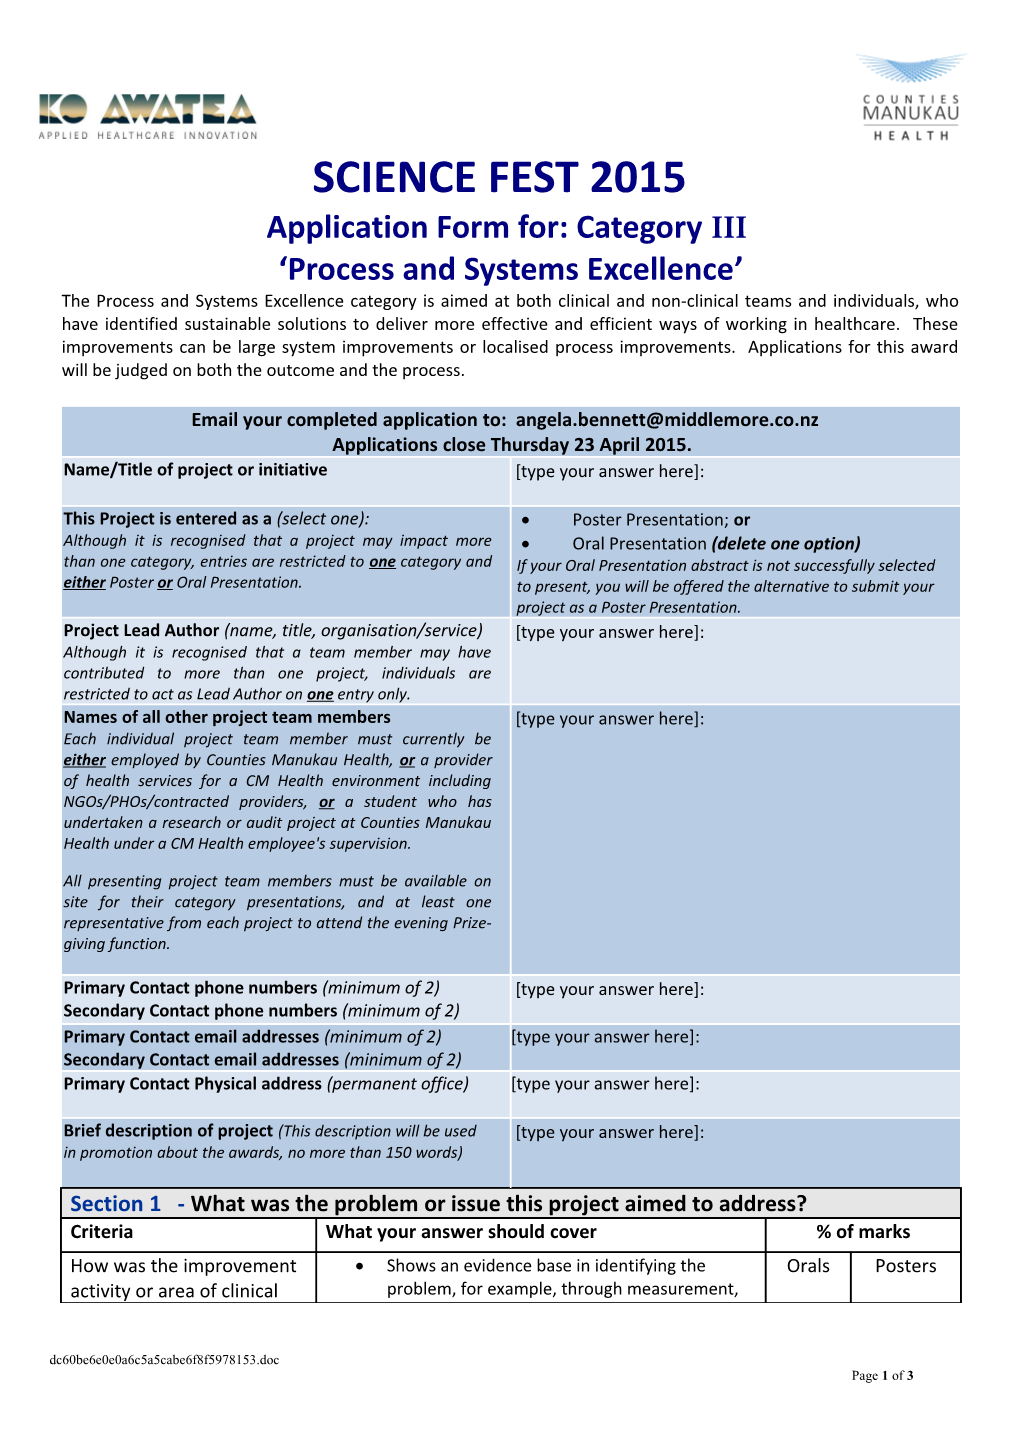 Application for Science Fest Process and Systems Excellence Category 2014